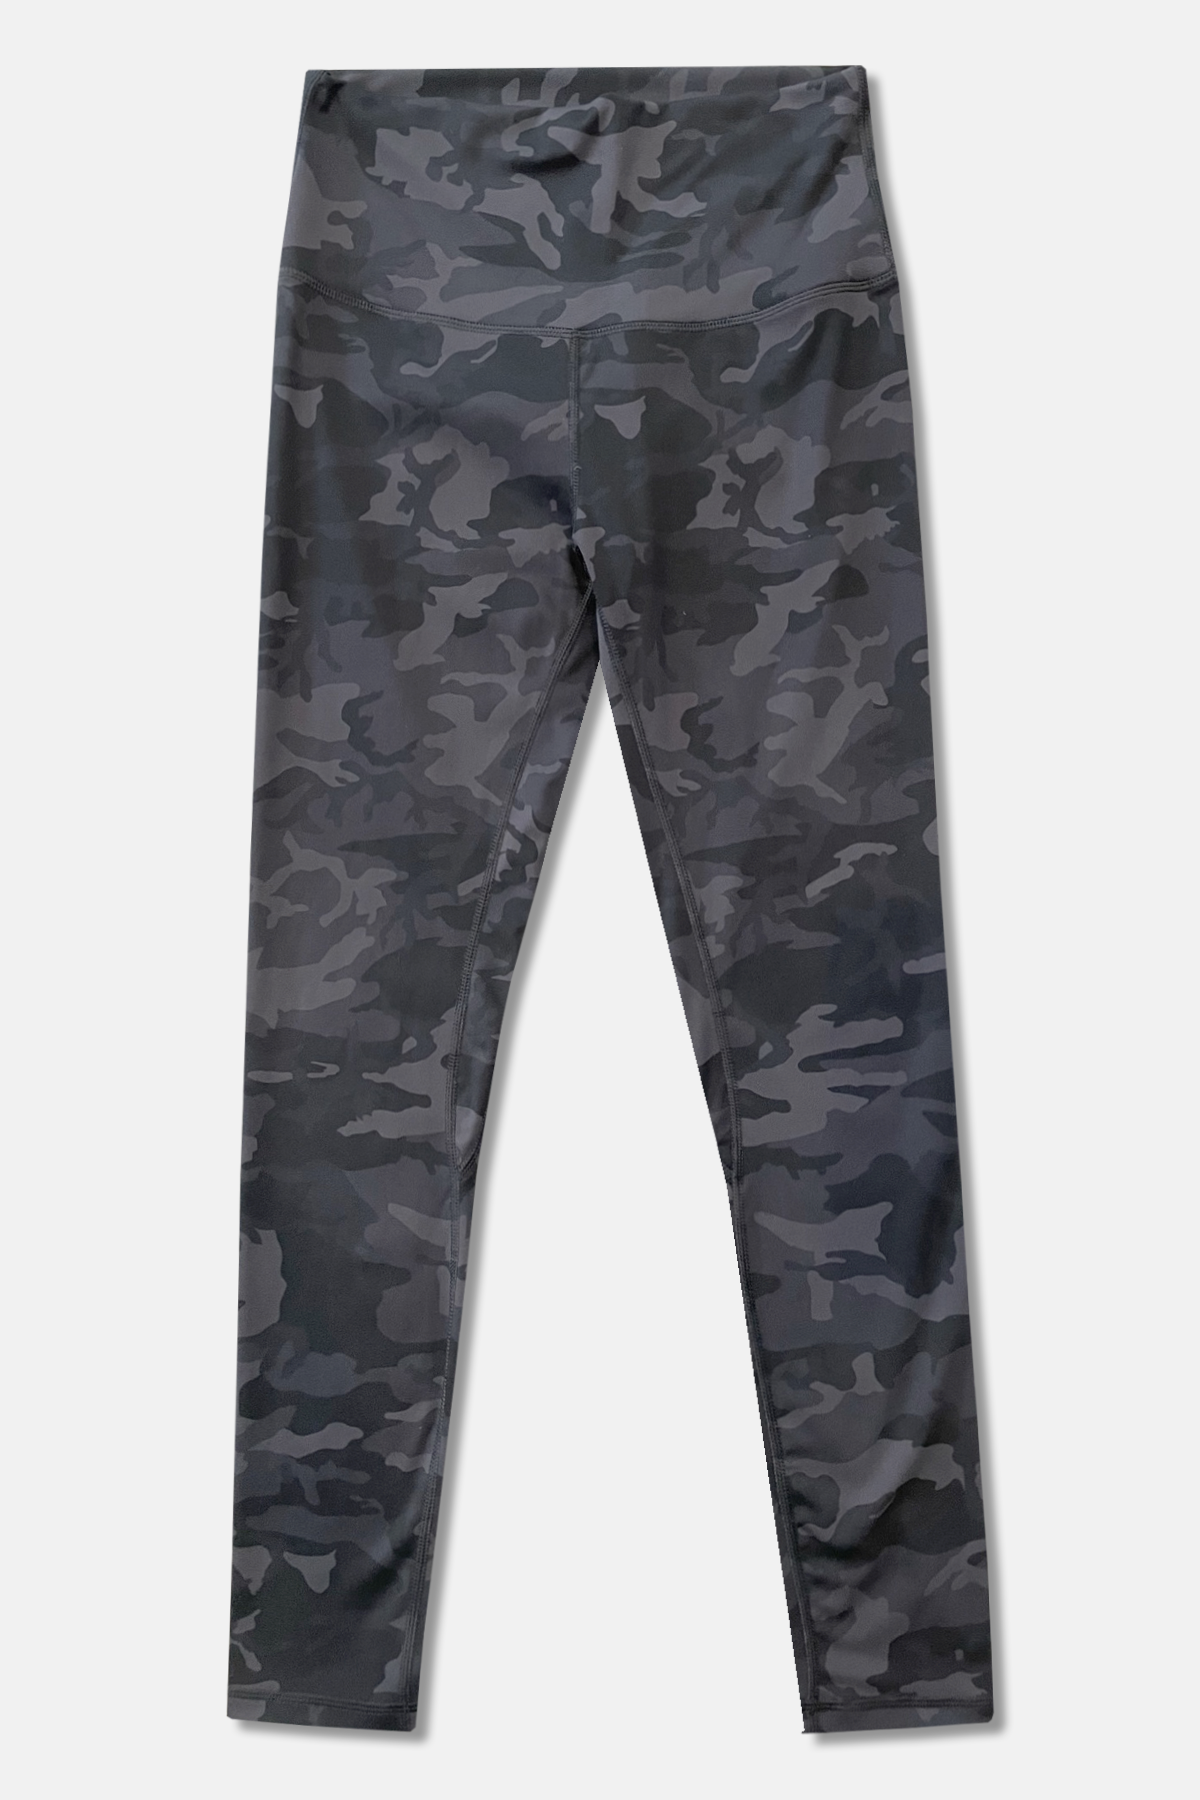 What Looks Good with Camo Leggings - Its All Leggings